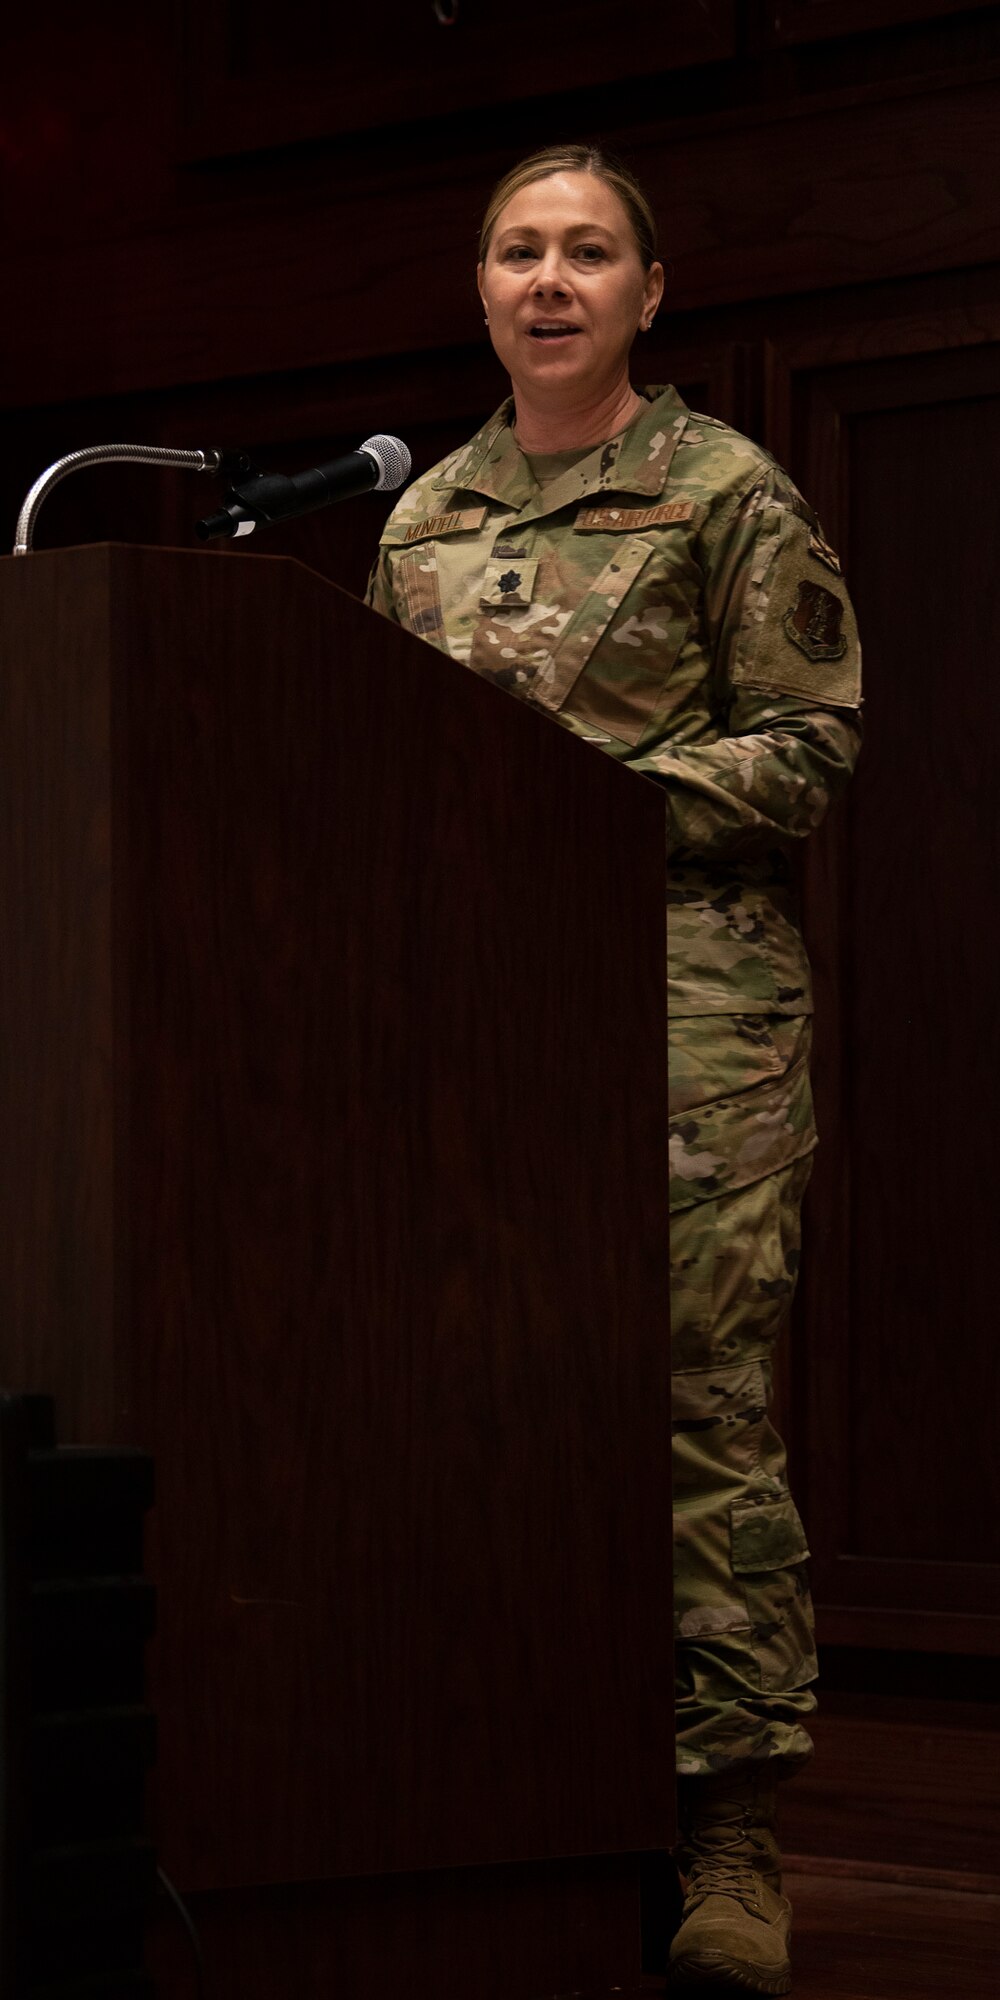 Lt. Col. Mundell delivers remarks following her assumption of command.